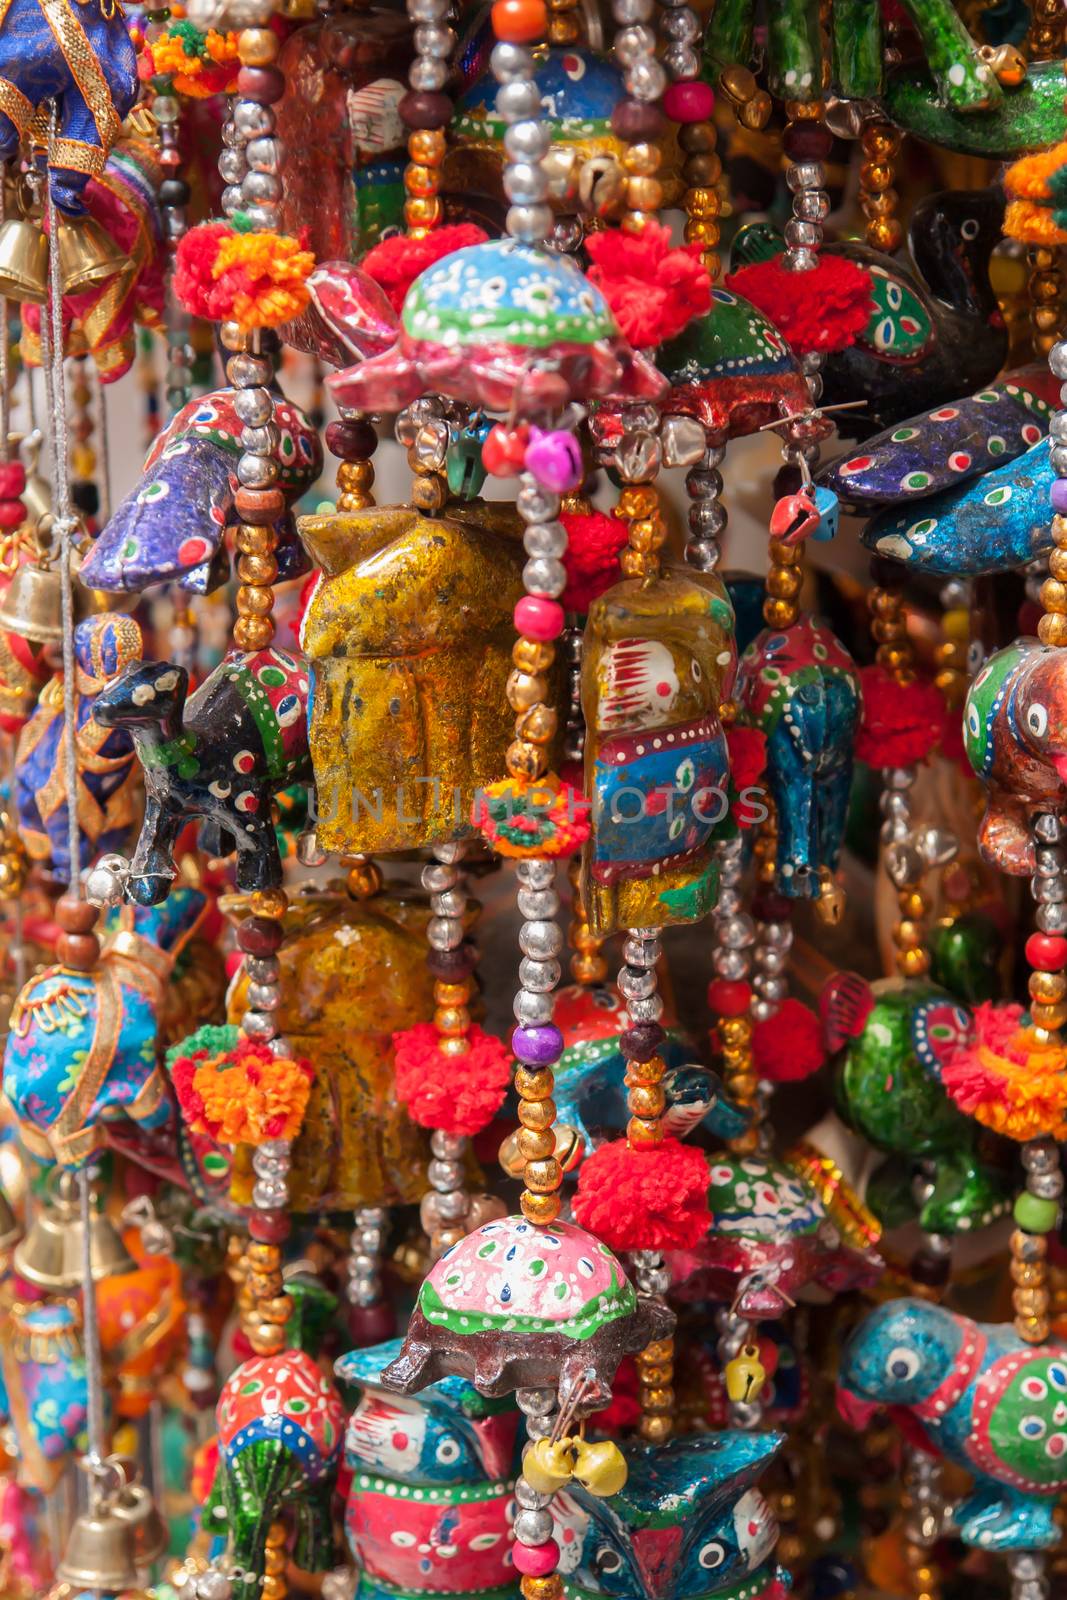 Colorful handmade hanging decorative chains in a local market India